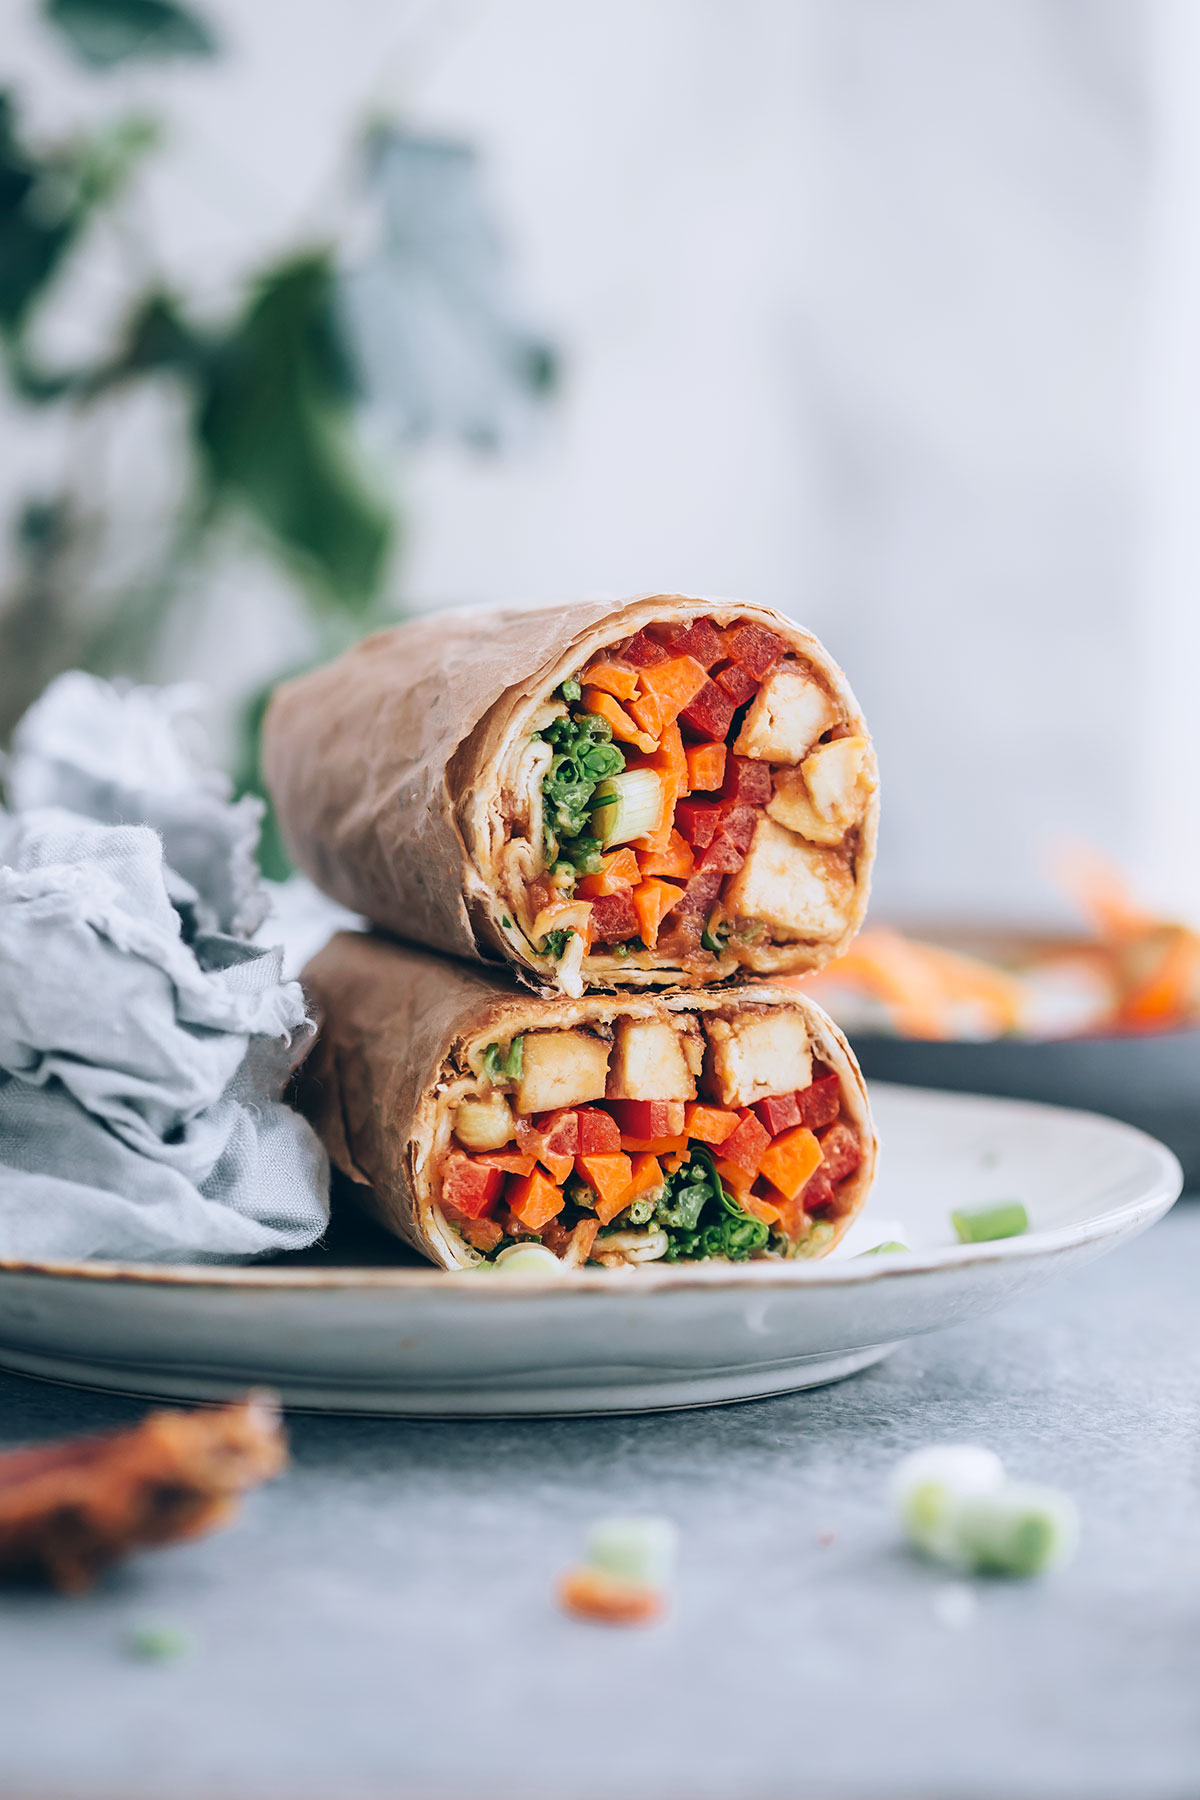 10 Plant-Based Meal Prep Ideas For Super Easy Lunches